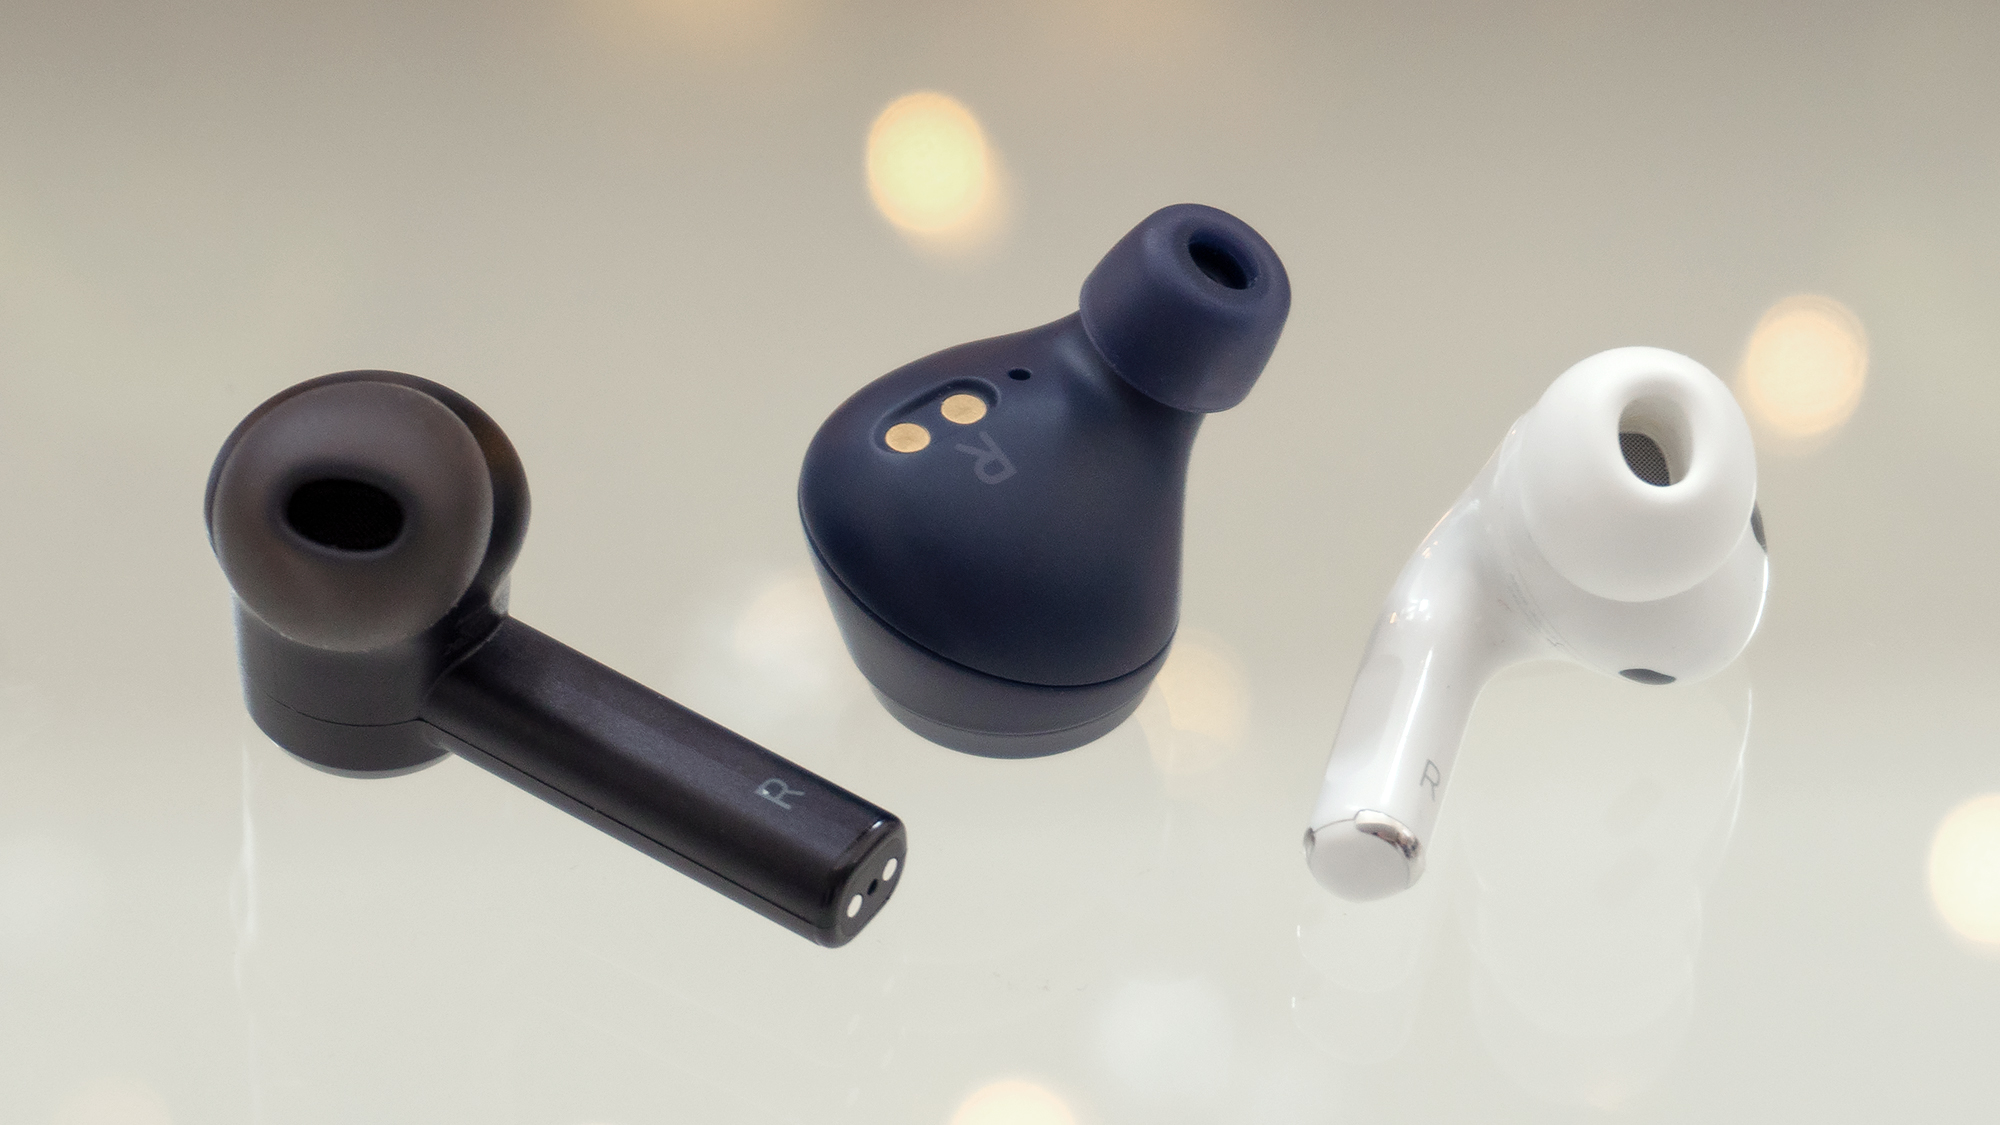 Razer's new Hammerhead True Wireless Pro (left) feature a design similar to the AirPods Pro (right) but a little larger to make room for impressive-sounding 10-millimetre drivers. Aside from the stem, they also don't stick out of your ears like the excellent Jabra Elite Active 75t (centre) tend to. (Photo: Andrew Liszewski / Gizmodo)